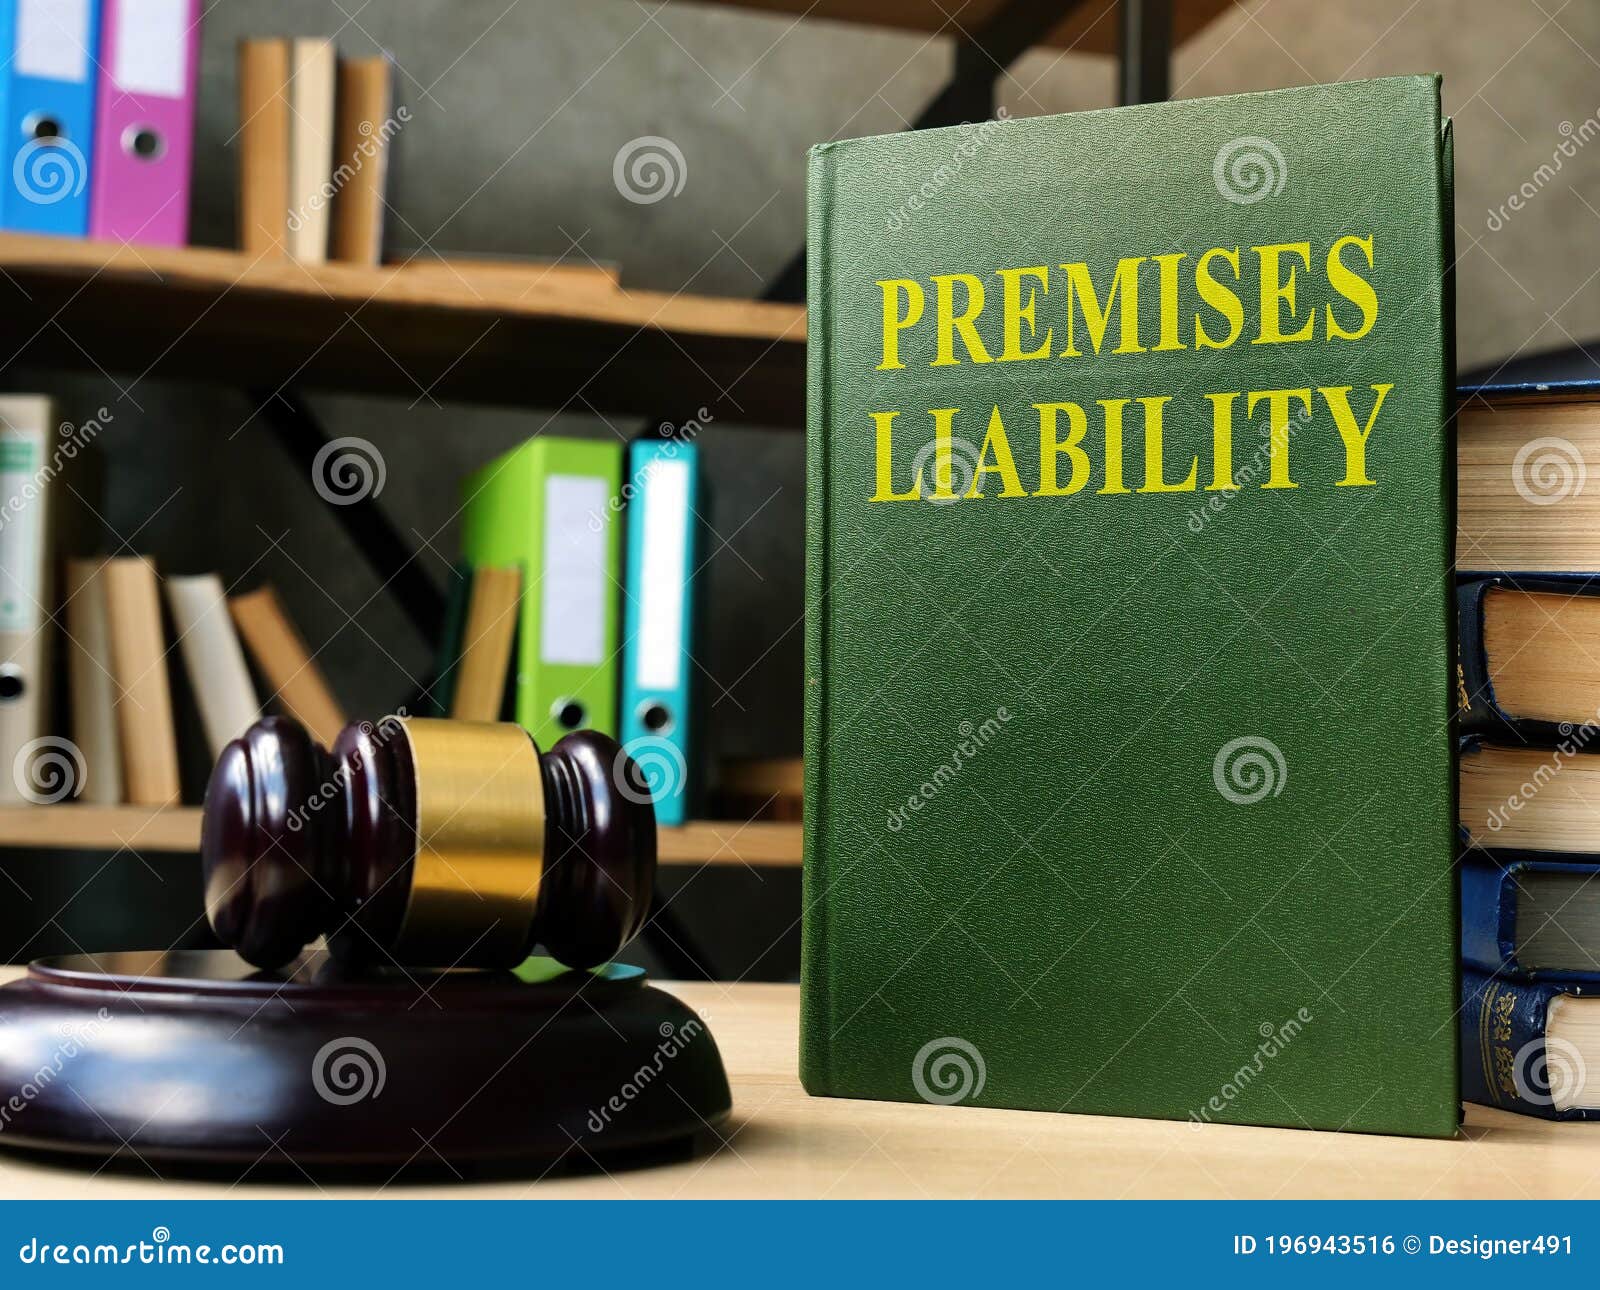 premises liability laws book for personal injury cases.